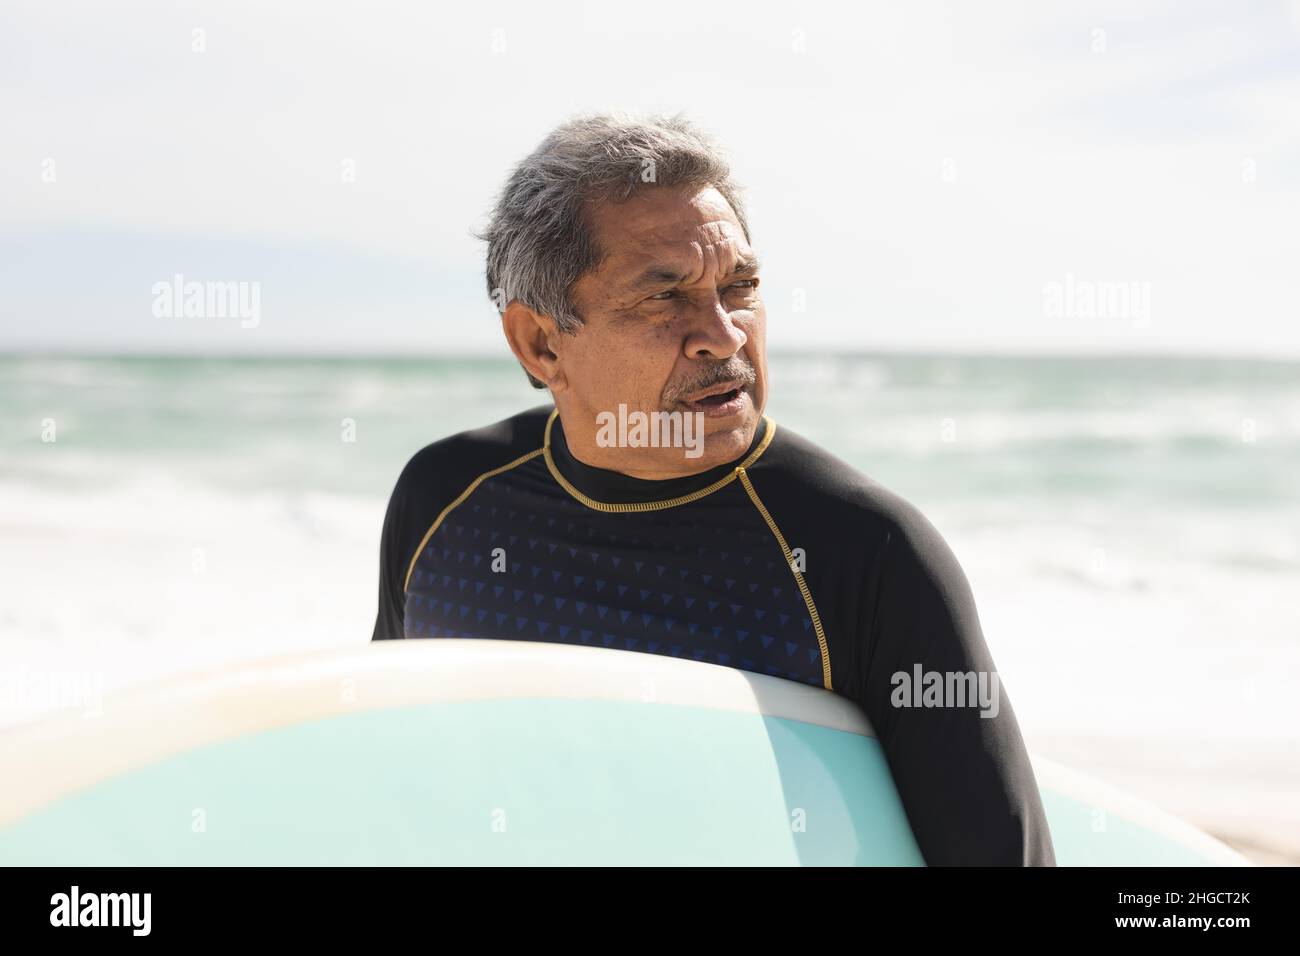 Retired biracial senior man looking away holding surfboard at beach against sky during sunny day Stock Photo